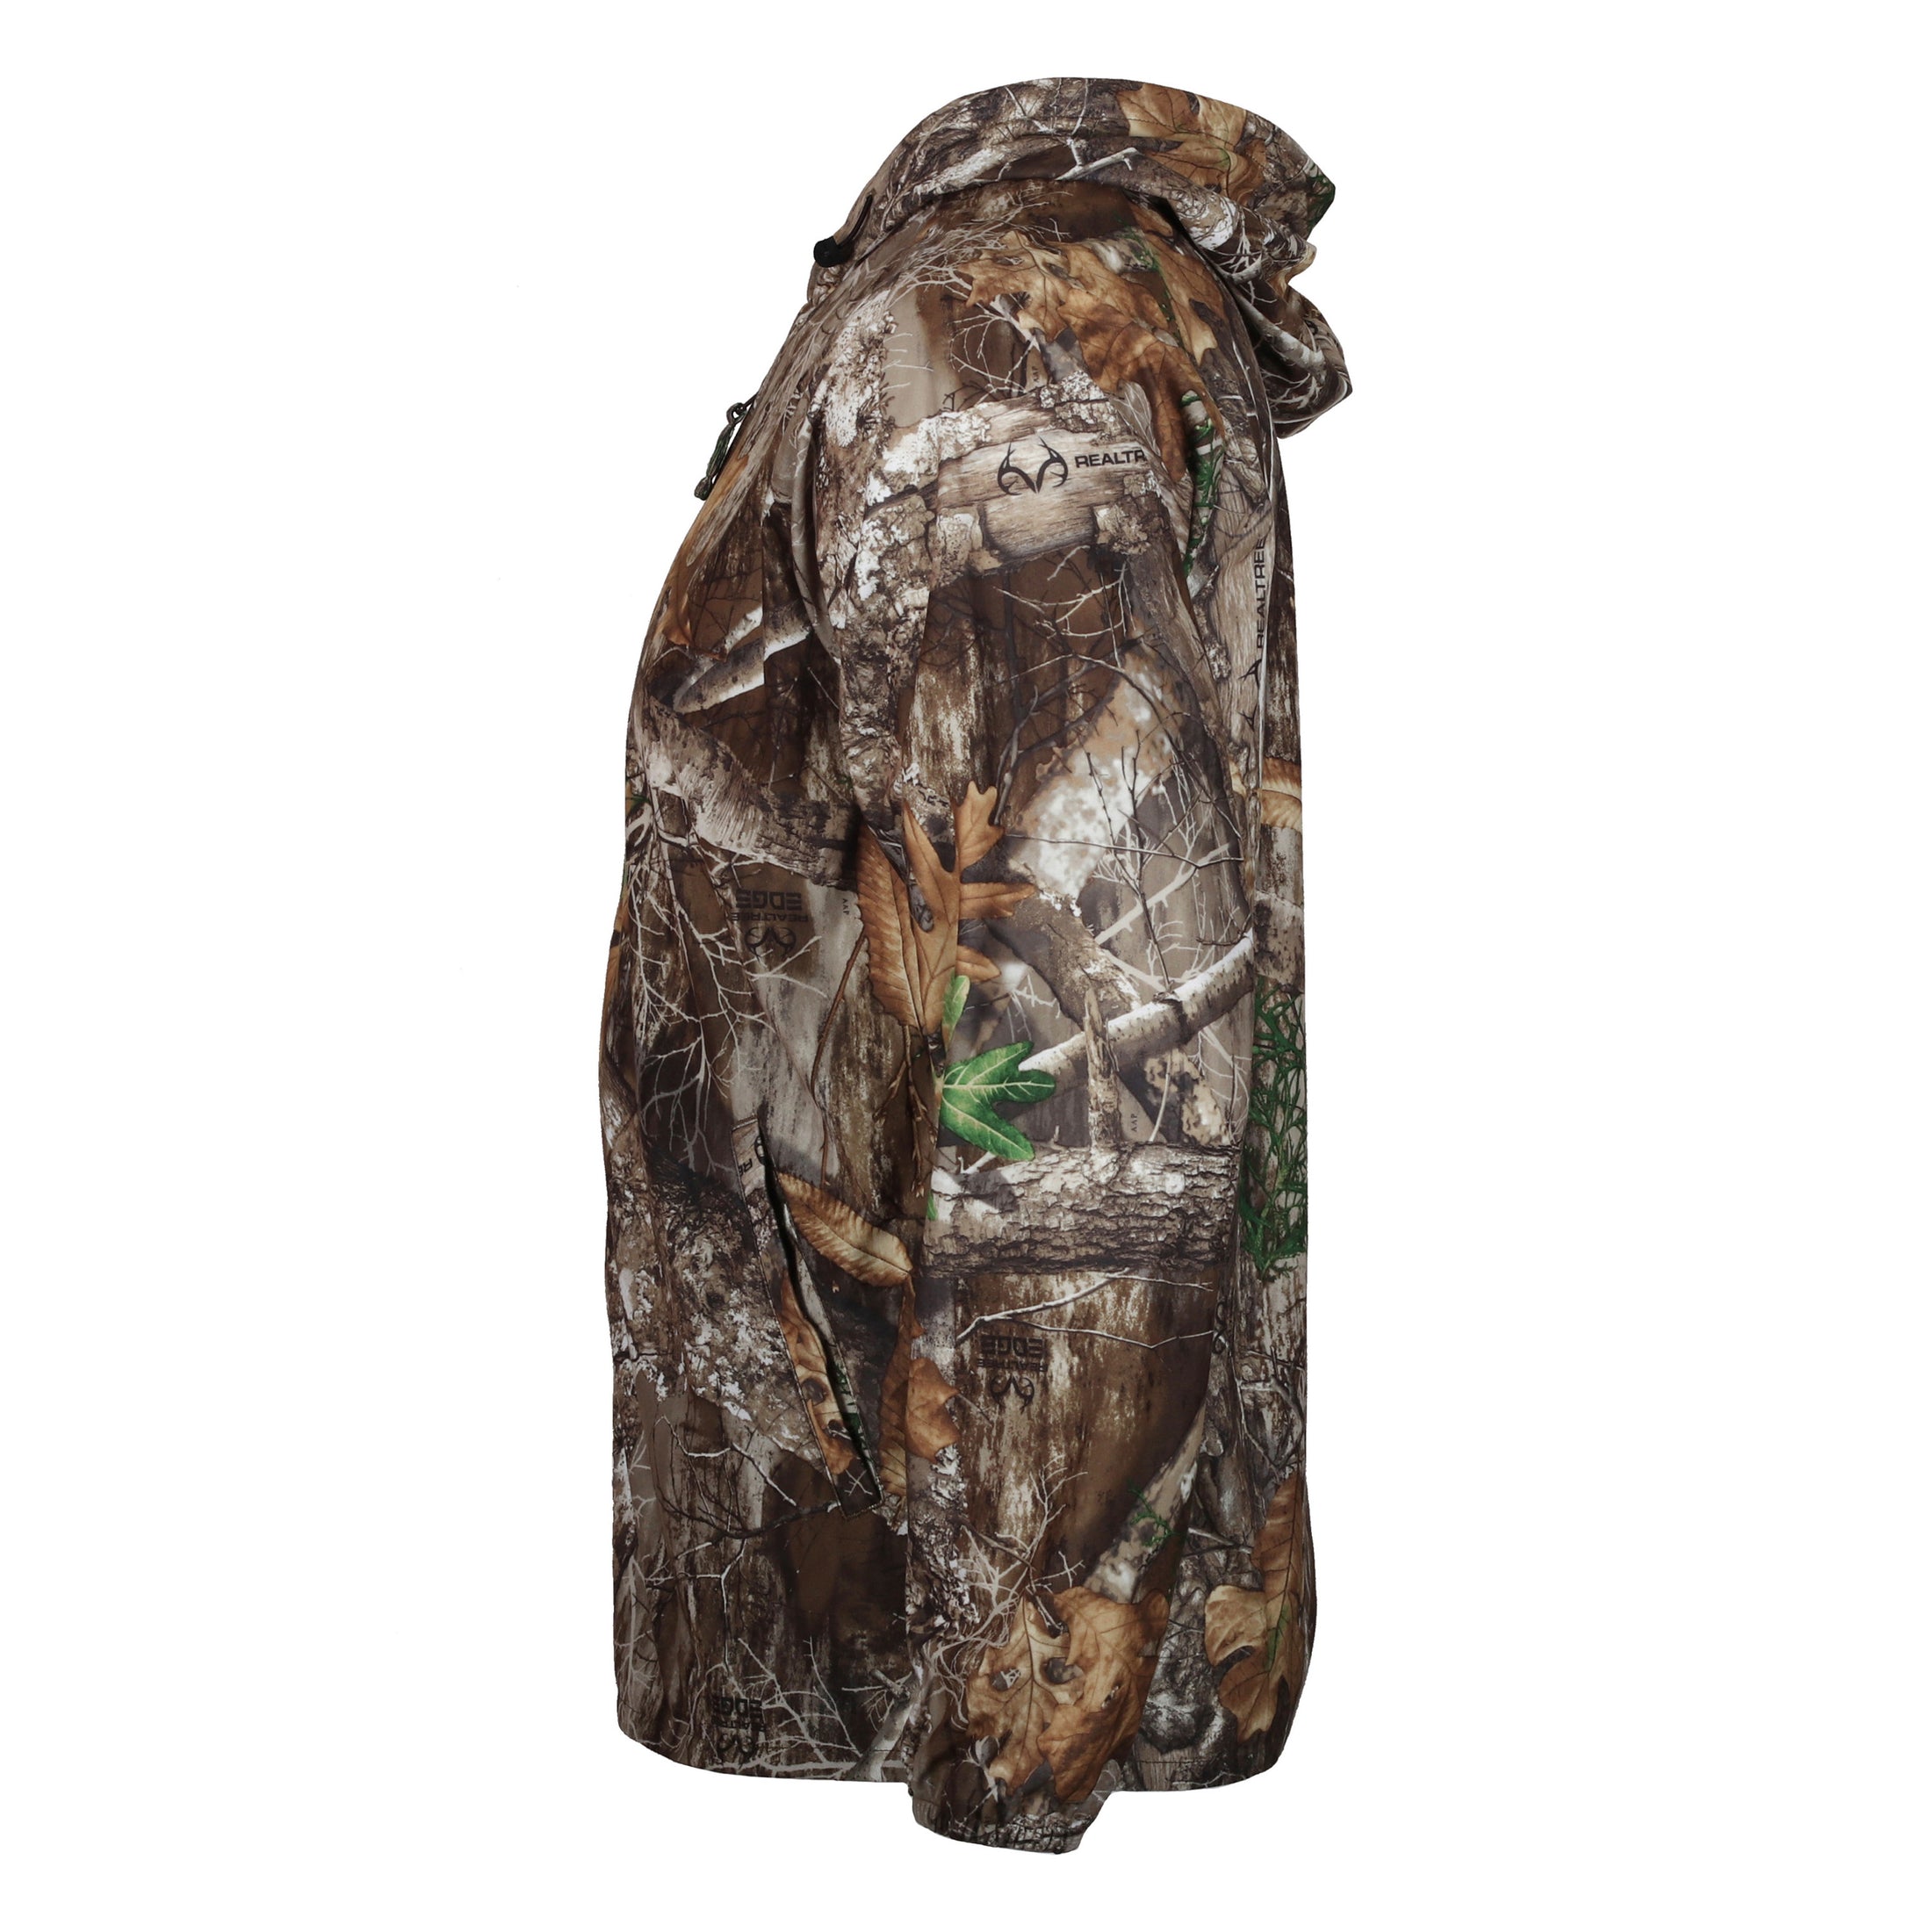 gamehide ElimiTick Insect Repellent Cover Up Jacket side (realtree edge)